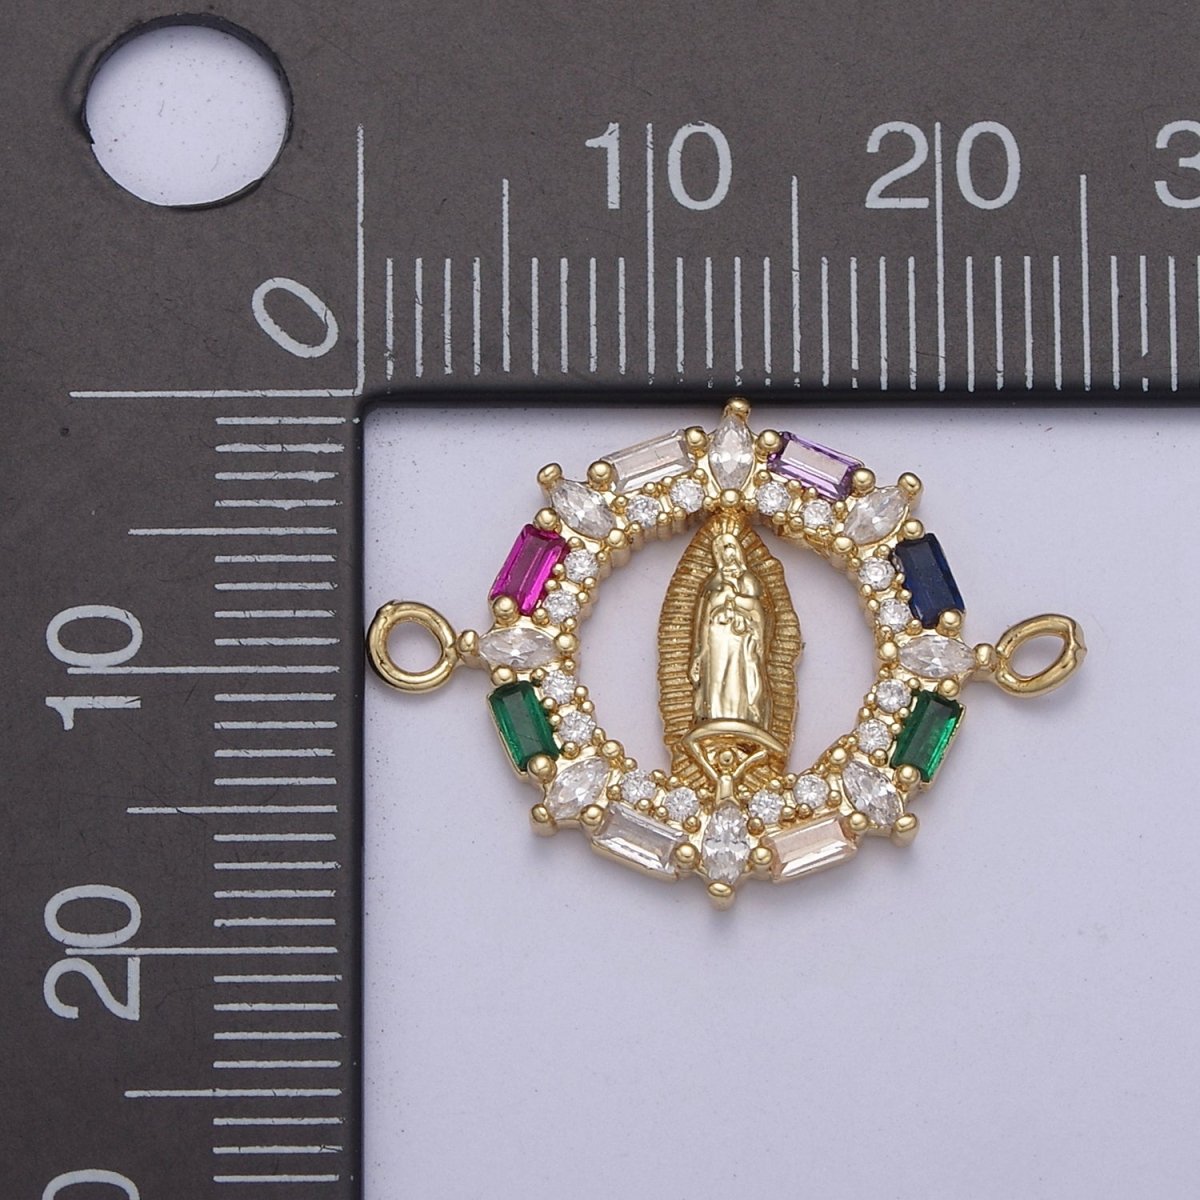 Virgin of Guadalupe Virgin Mary Charm Connector for bracelet, religious jewelry supply F-172 - DLUXCA